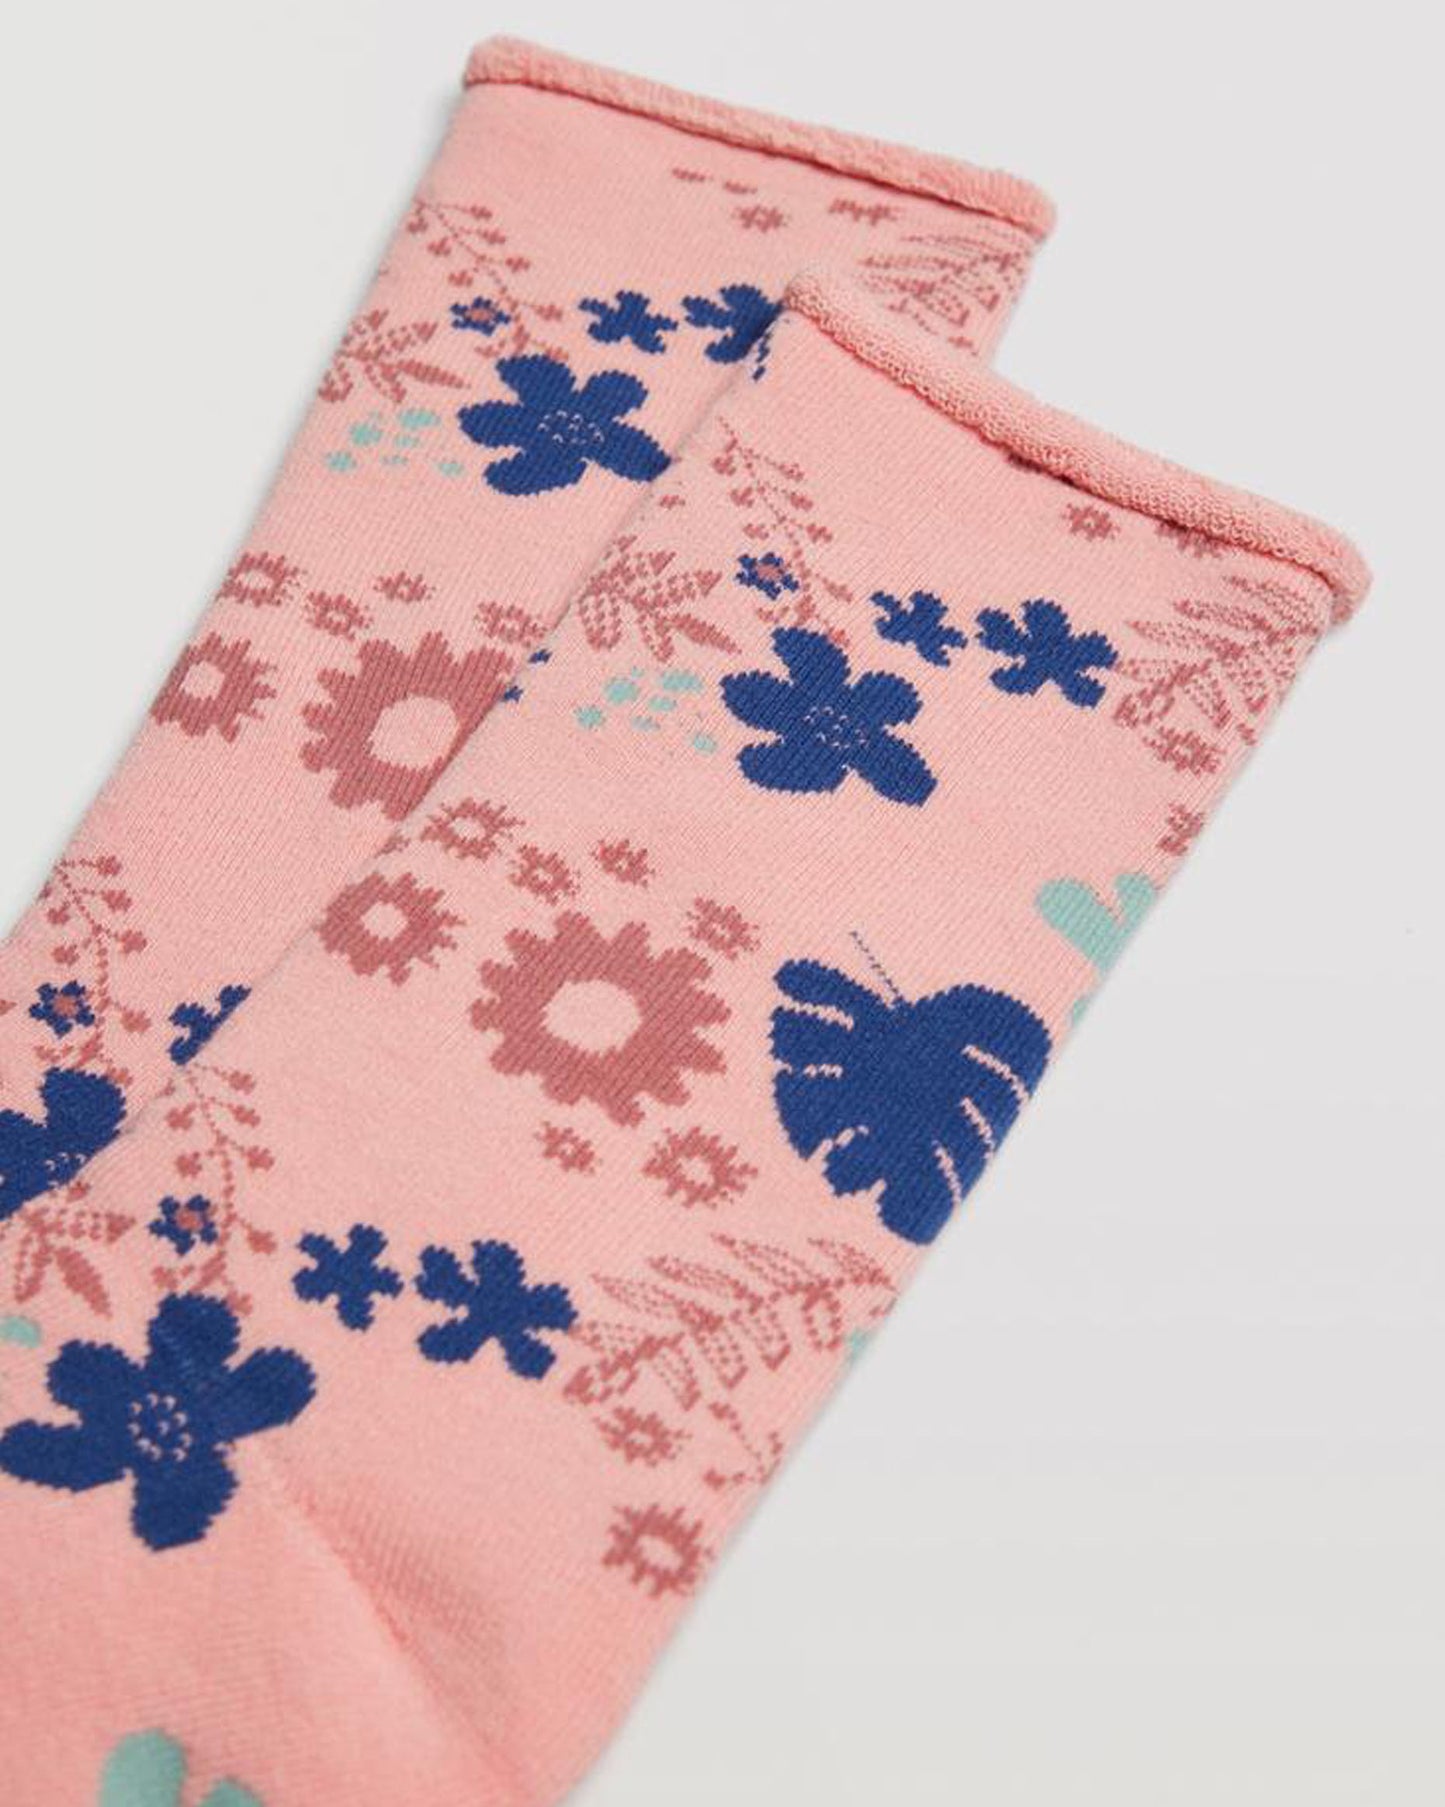 Ysabel Mora 12886 Flower Thermal Socks - Terry lined warm pale pink cotton thermal socks with a floral and leaf pattern in terracotta pink and navy blue, shaped heel and no cuff comfort top.